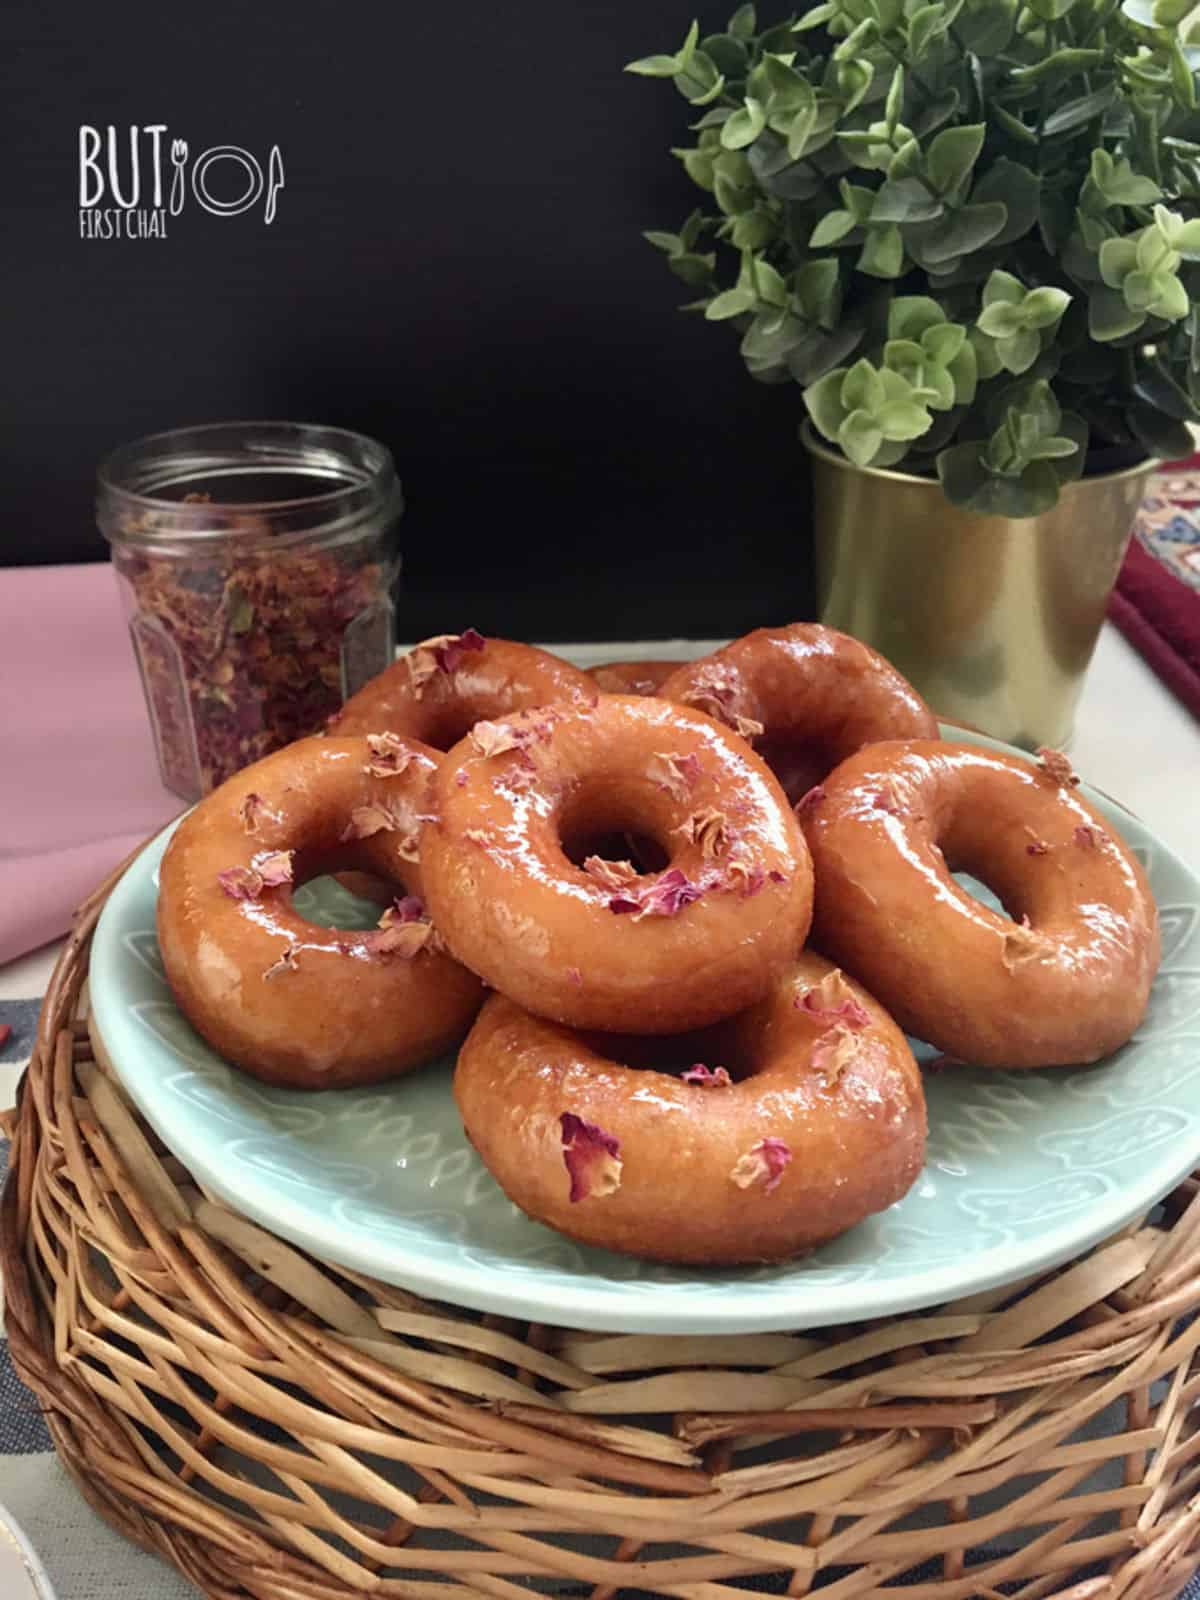 rose glazed yeast donuts stacked on a plate garnished with dried rose petals.